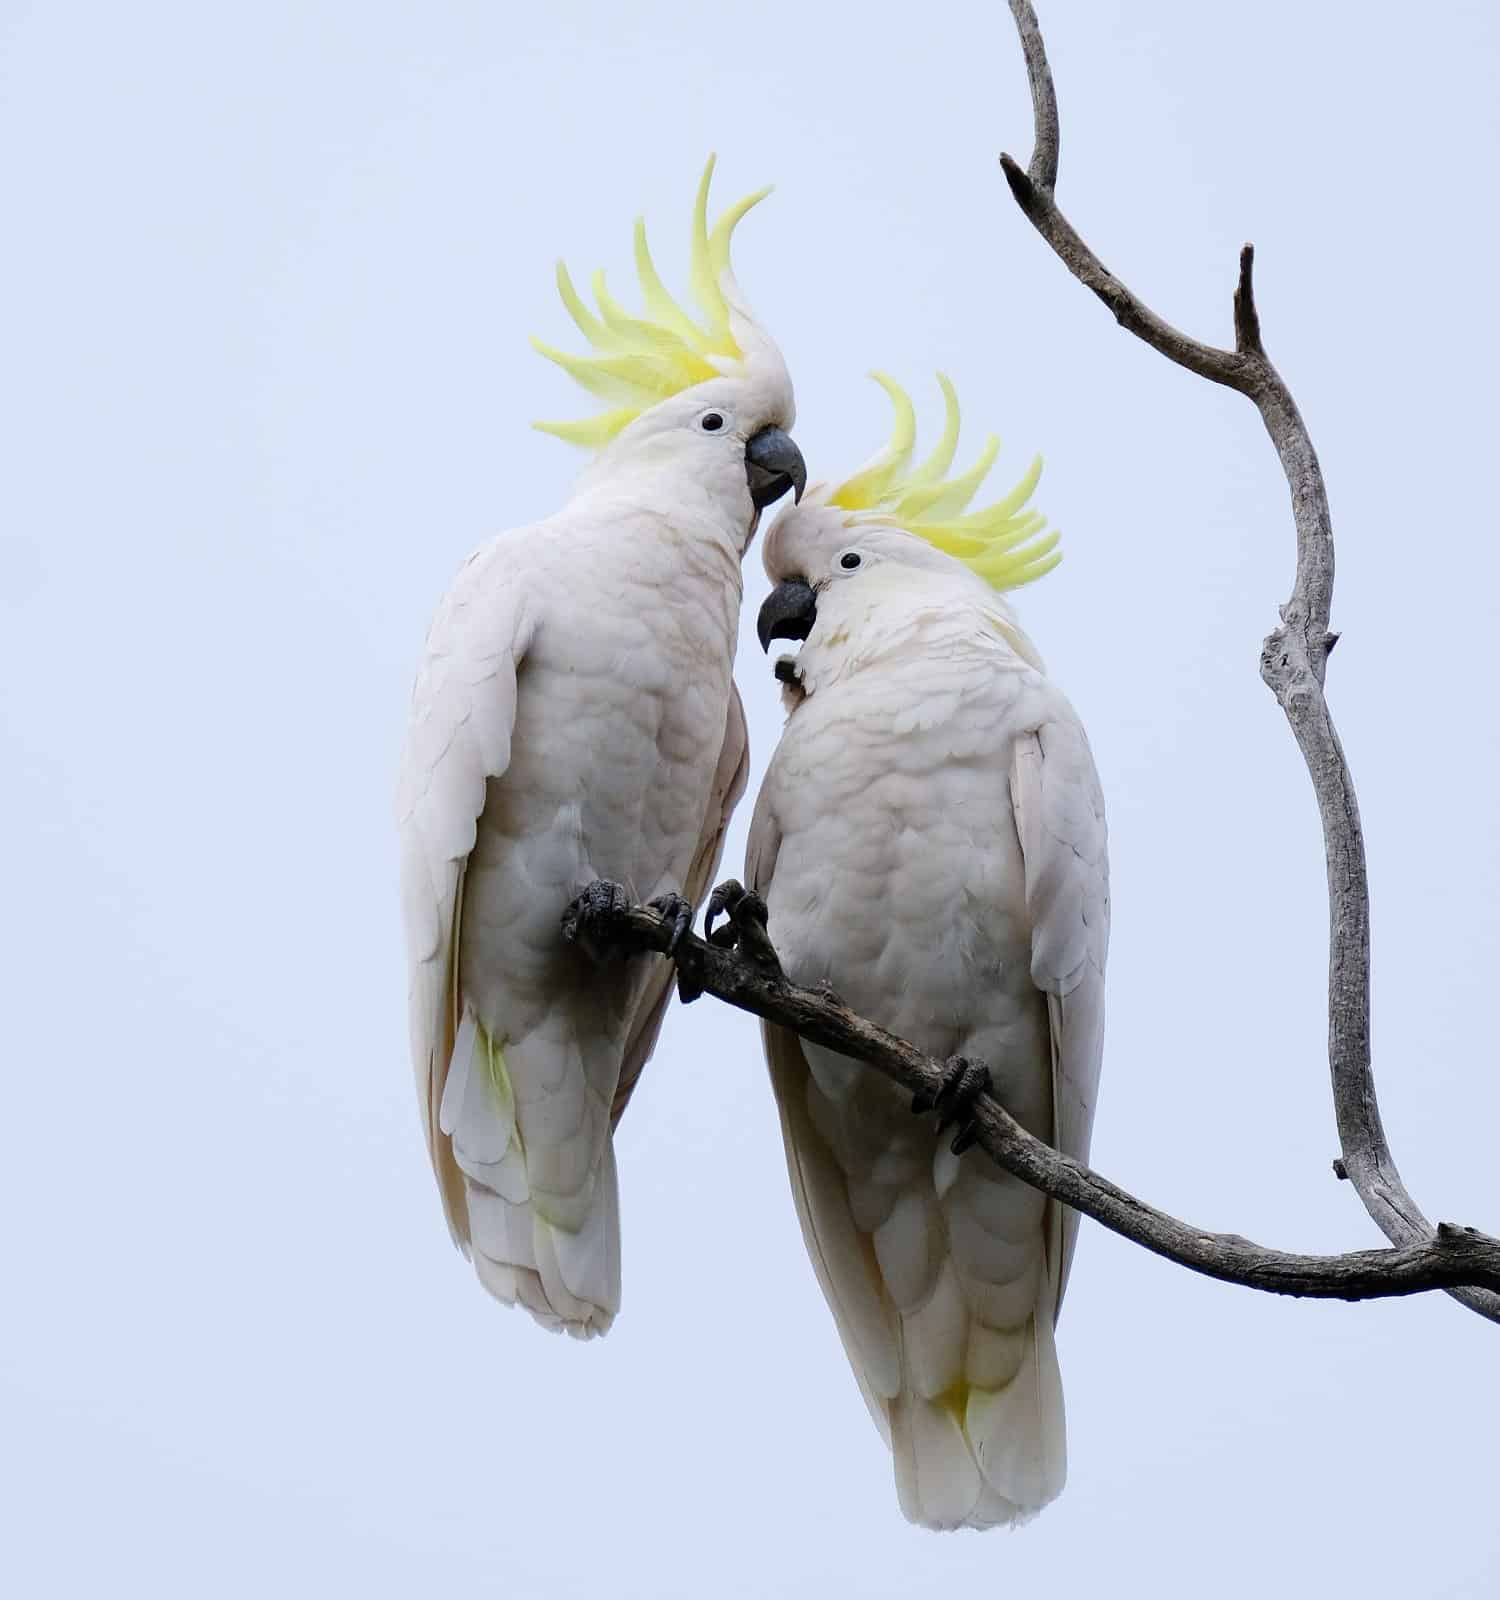 A vertical low angle shot of two sulphur-crested cockatoo birds on a branch together